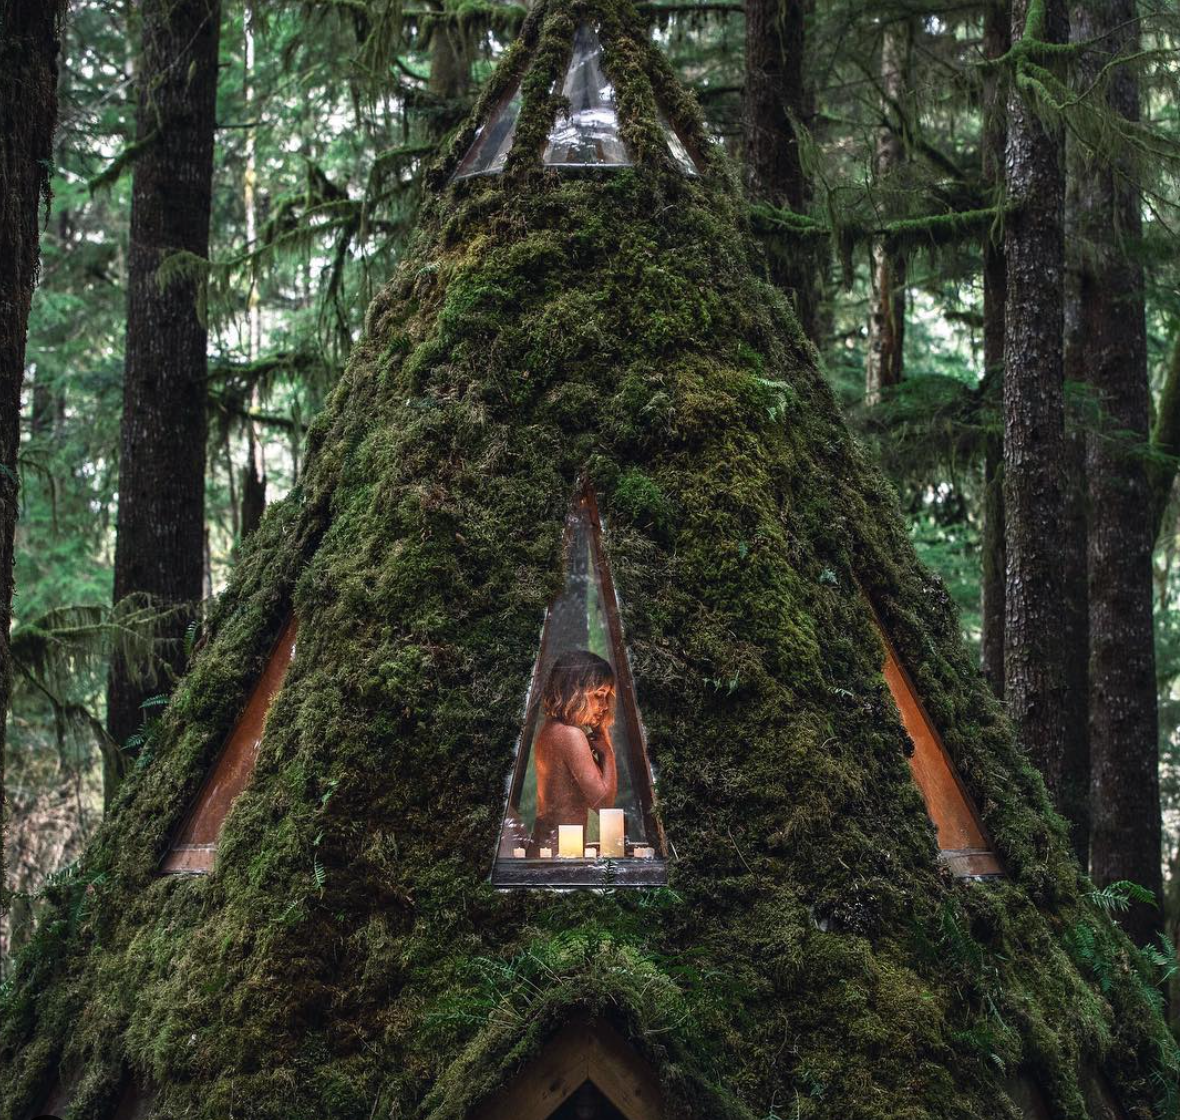 Sara Underwood poses through the window of a magical moss-covered cabin in the Pacific Northwest built by her and partner Jacob Witzling.